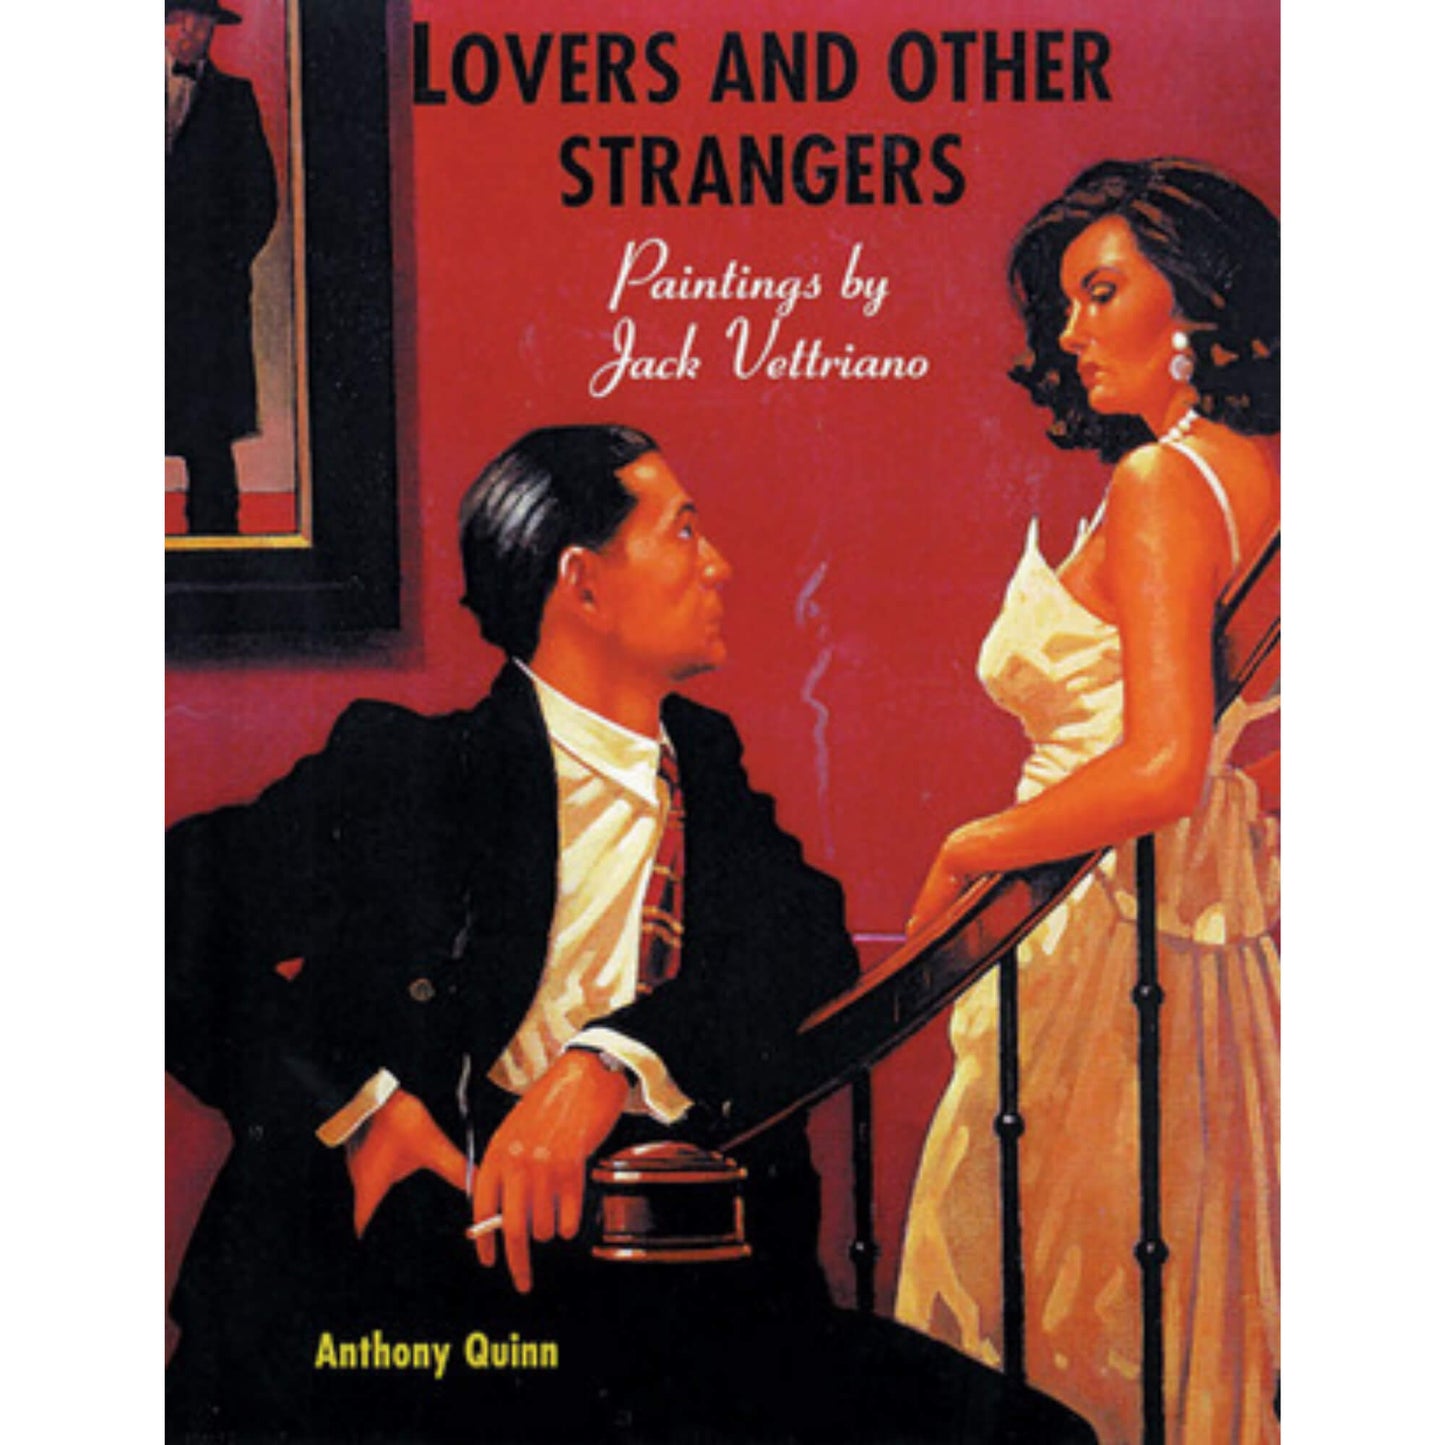 Load image into Gallery viewer, Lovers and Other Strangers Signed Book Jack Vettriano
